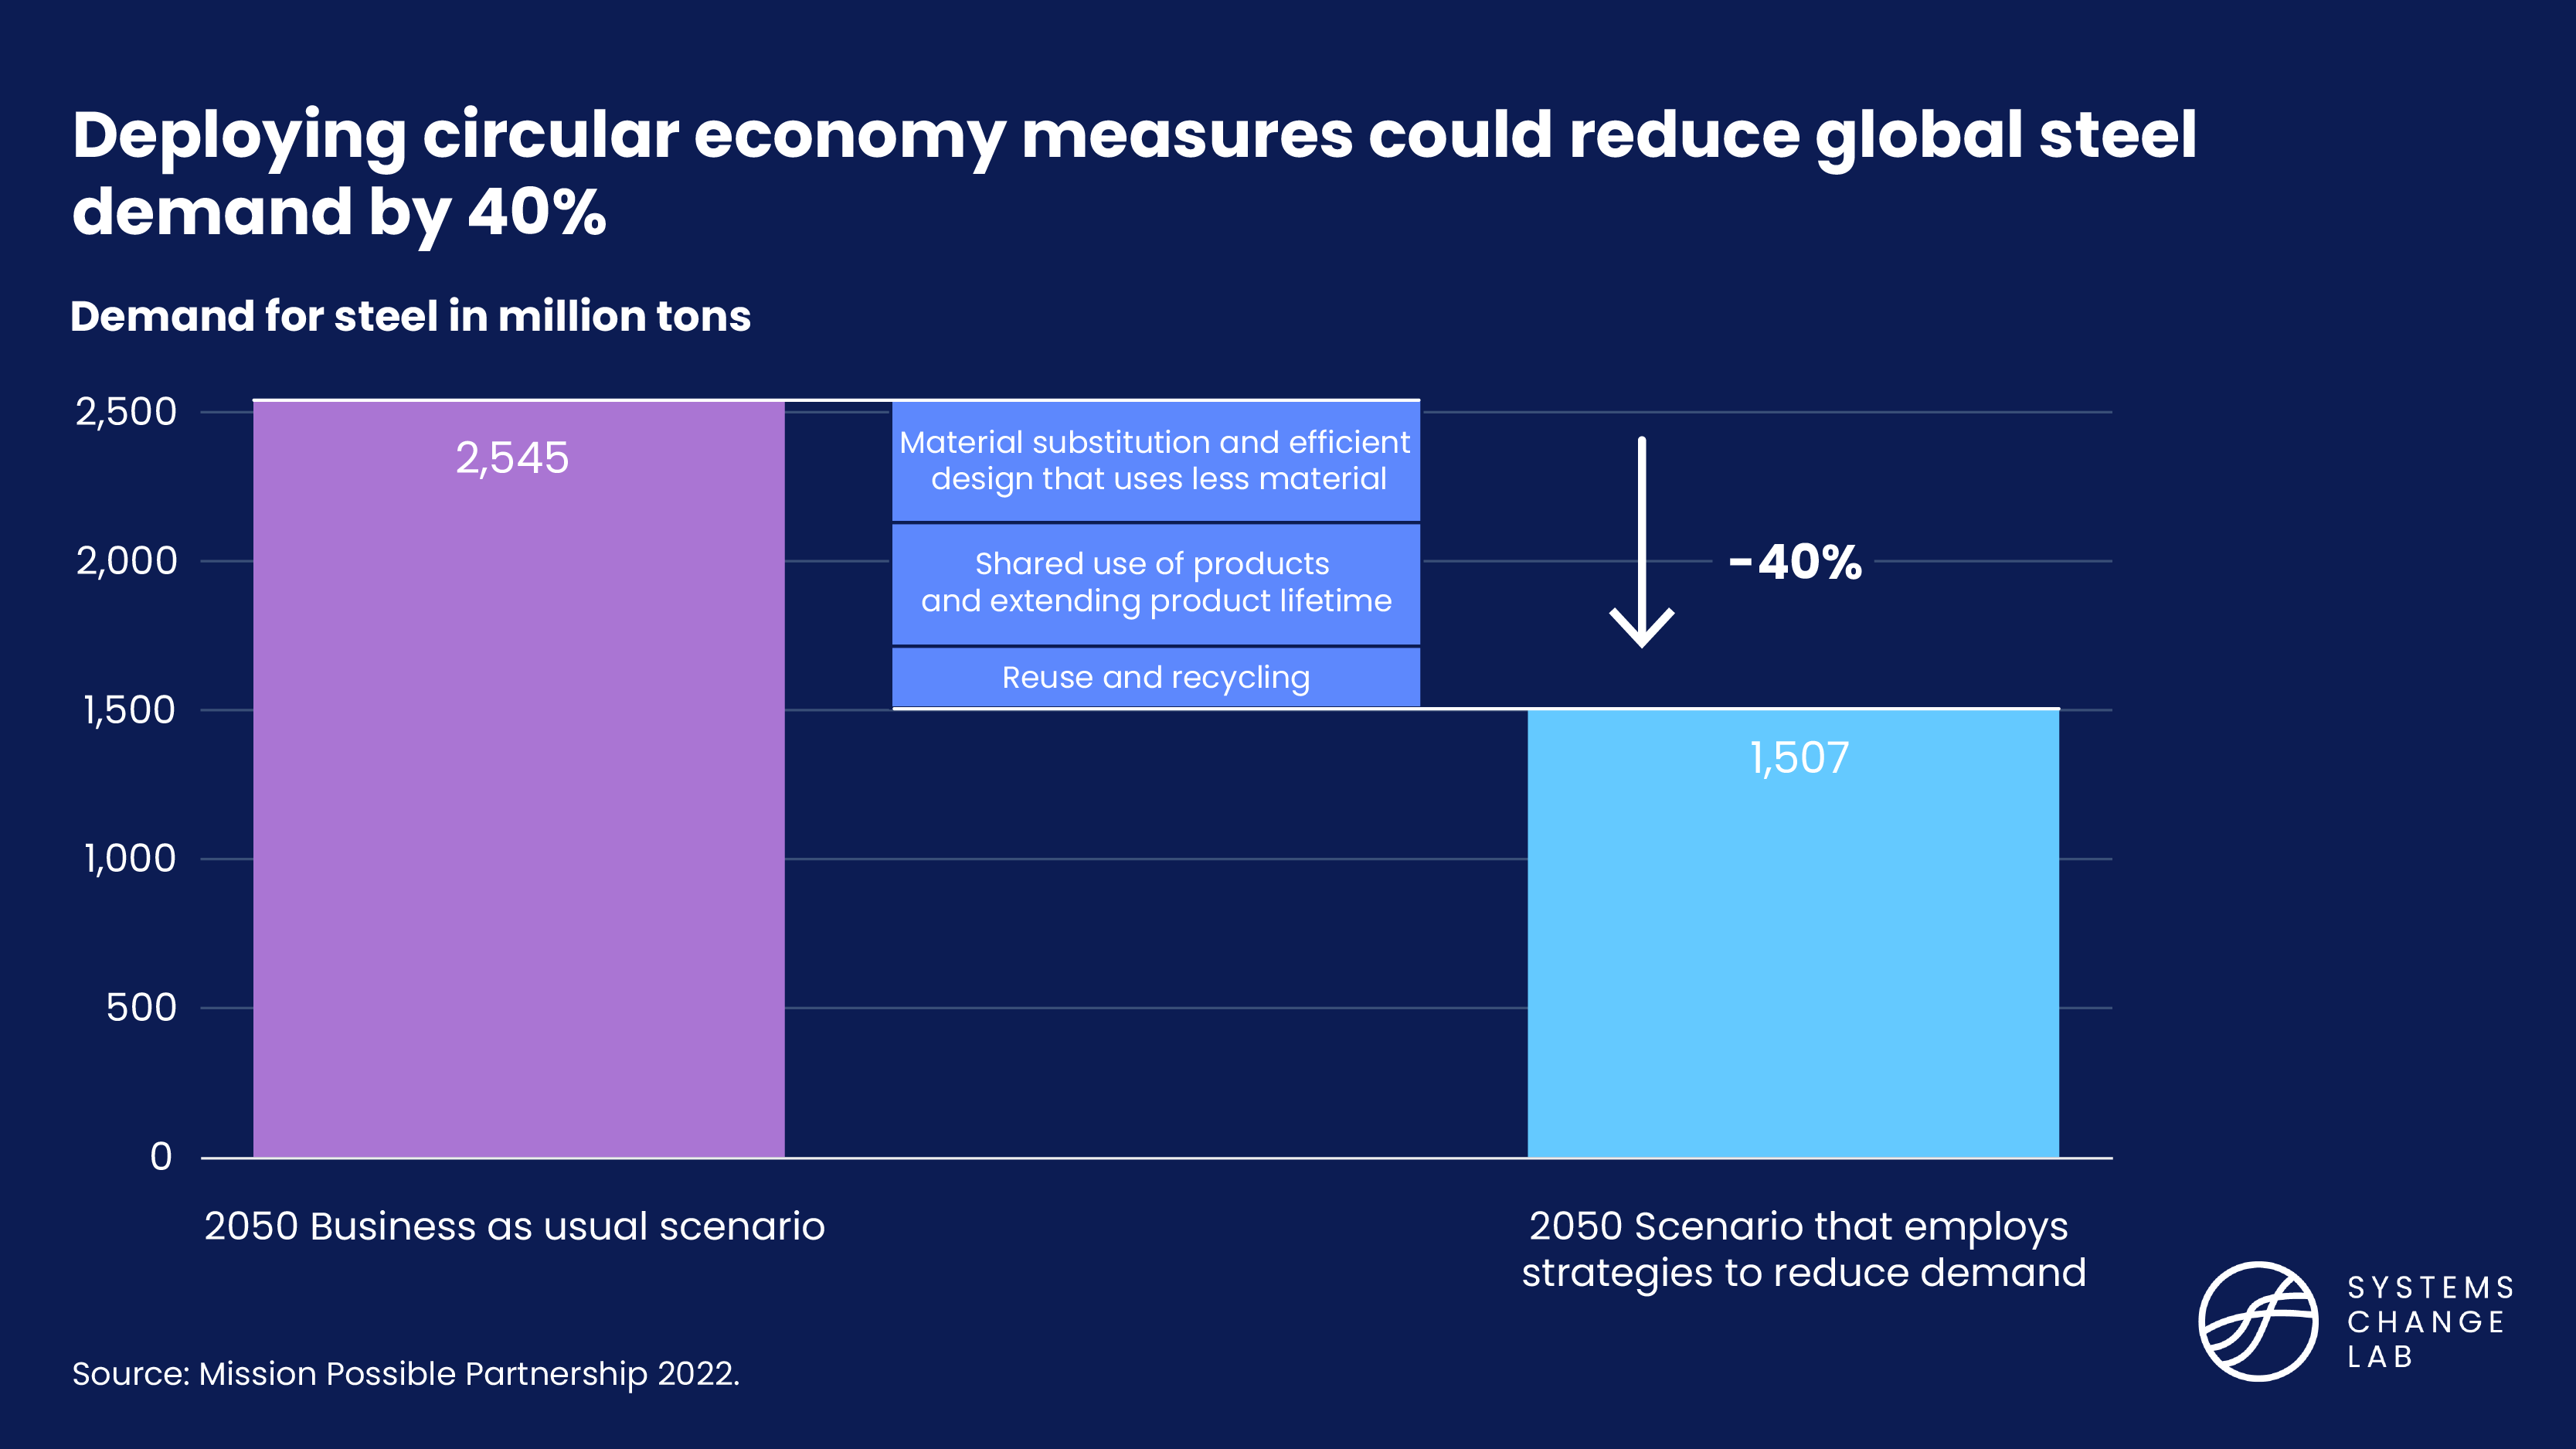 Deploying circular economy measures could reduce global steel demand by 40%